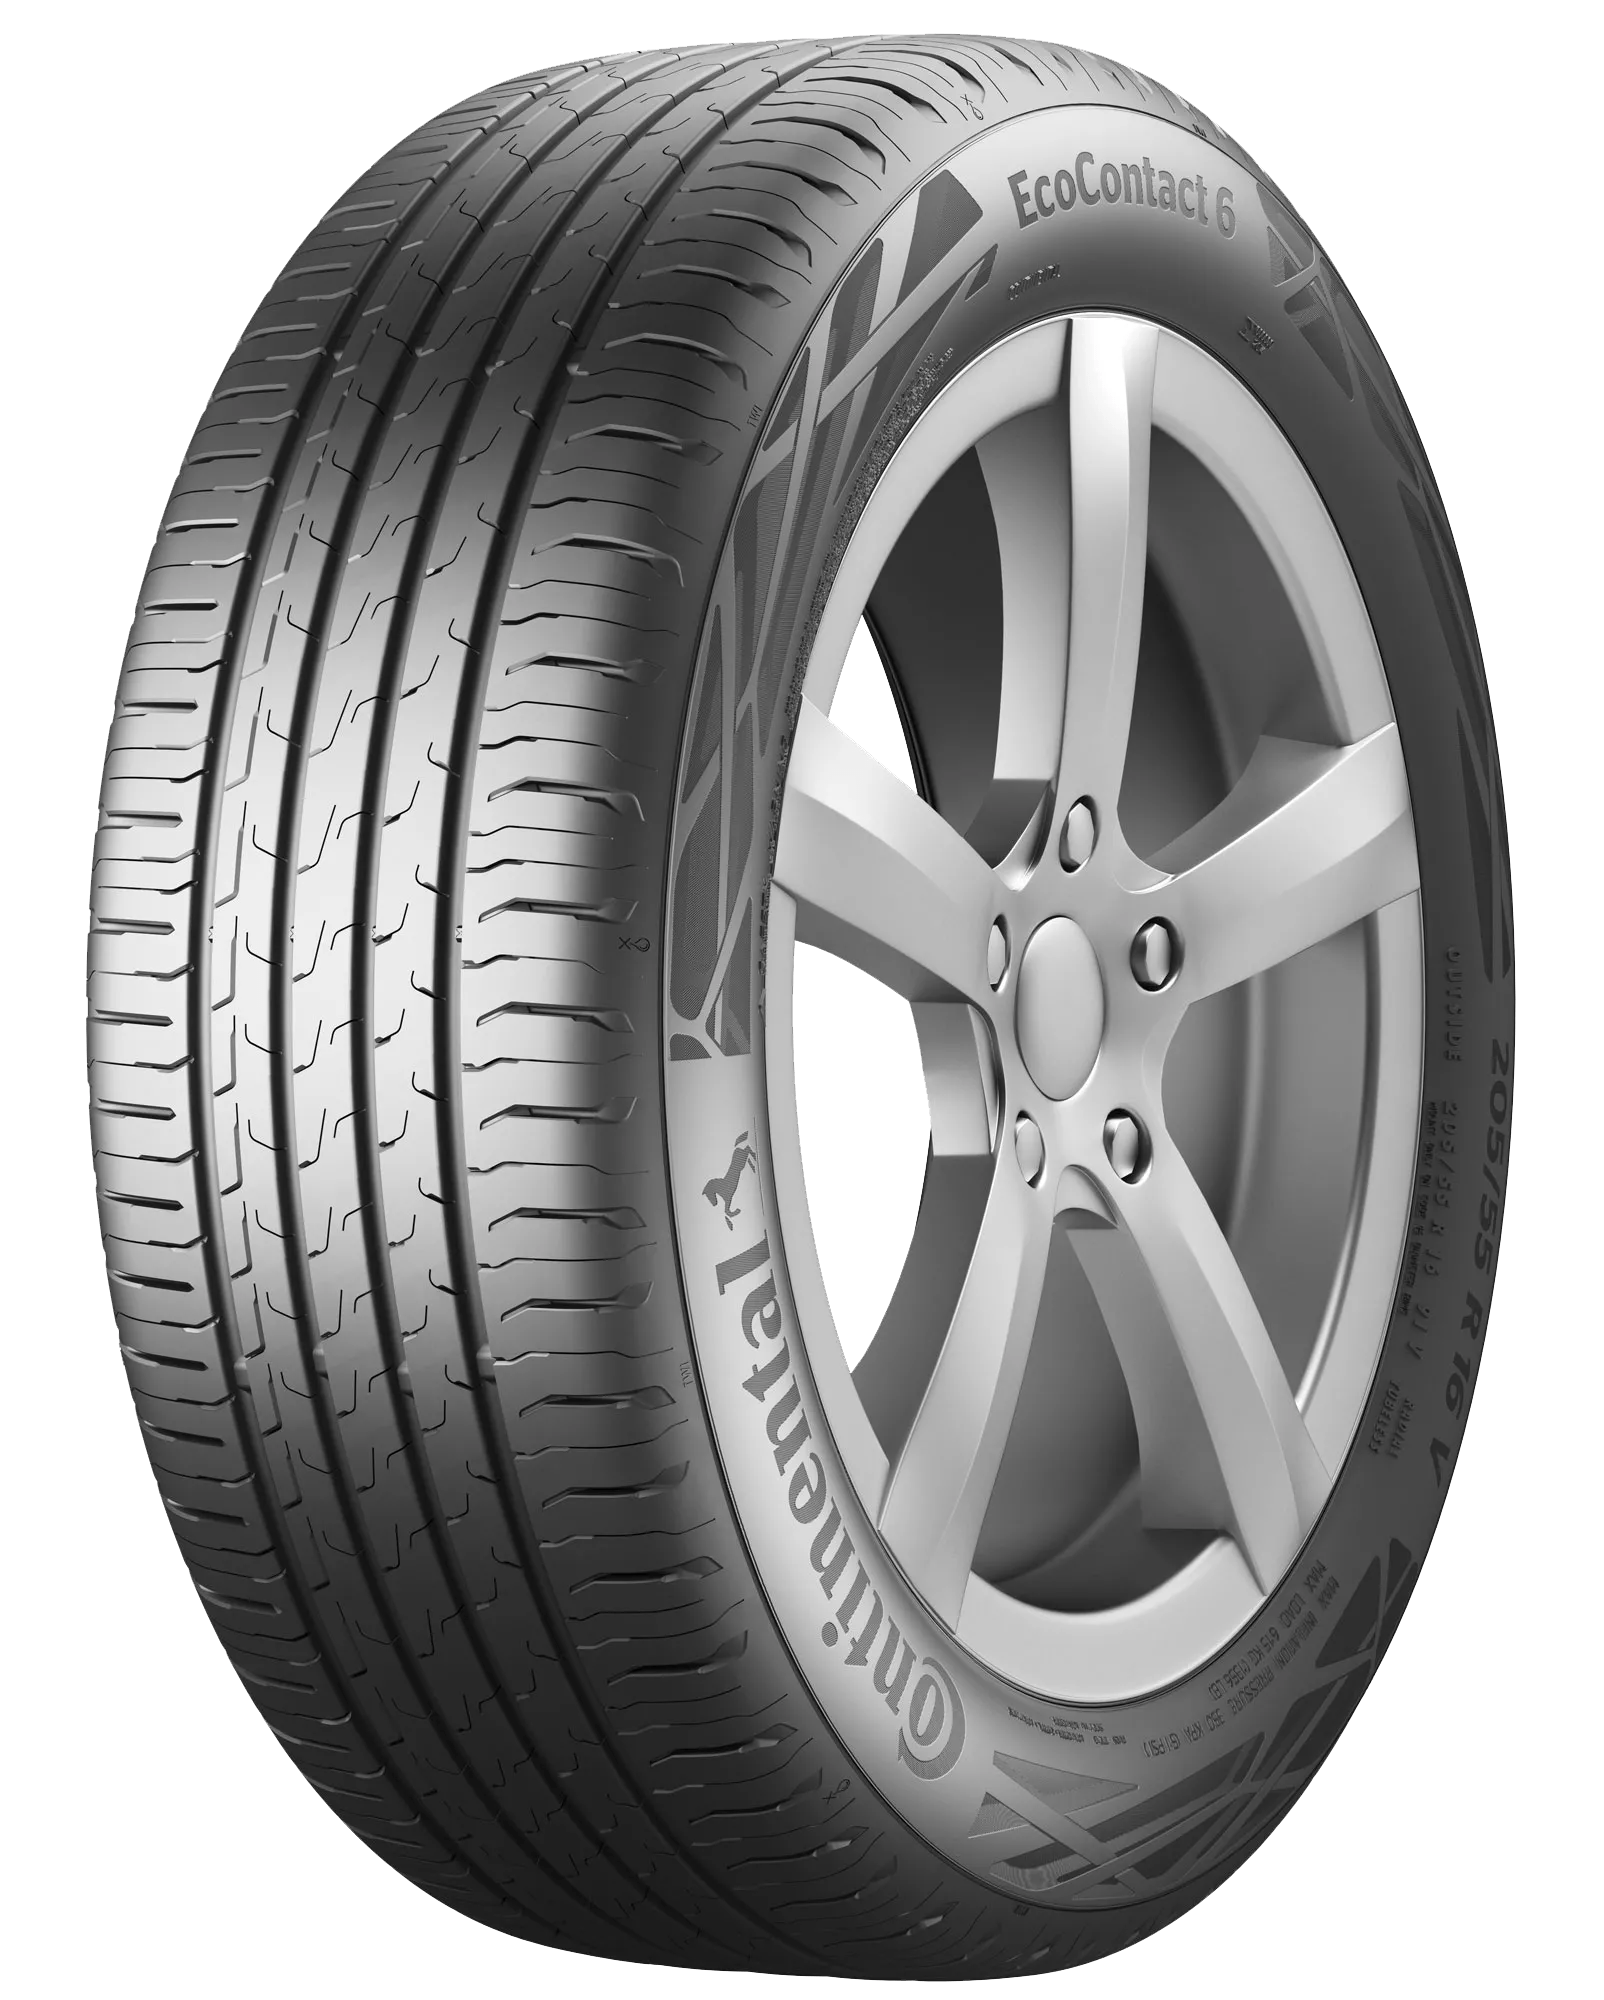 215/65R17 Continental EcoContact 6 Audi (AO) 99H Tyre